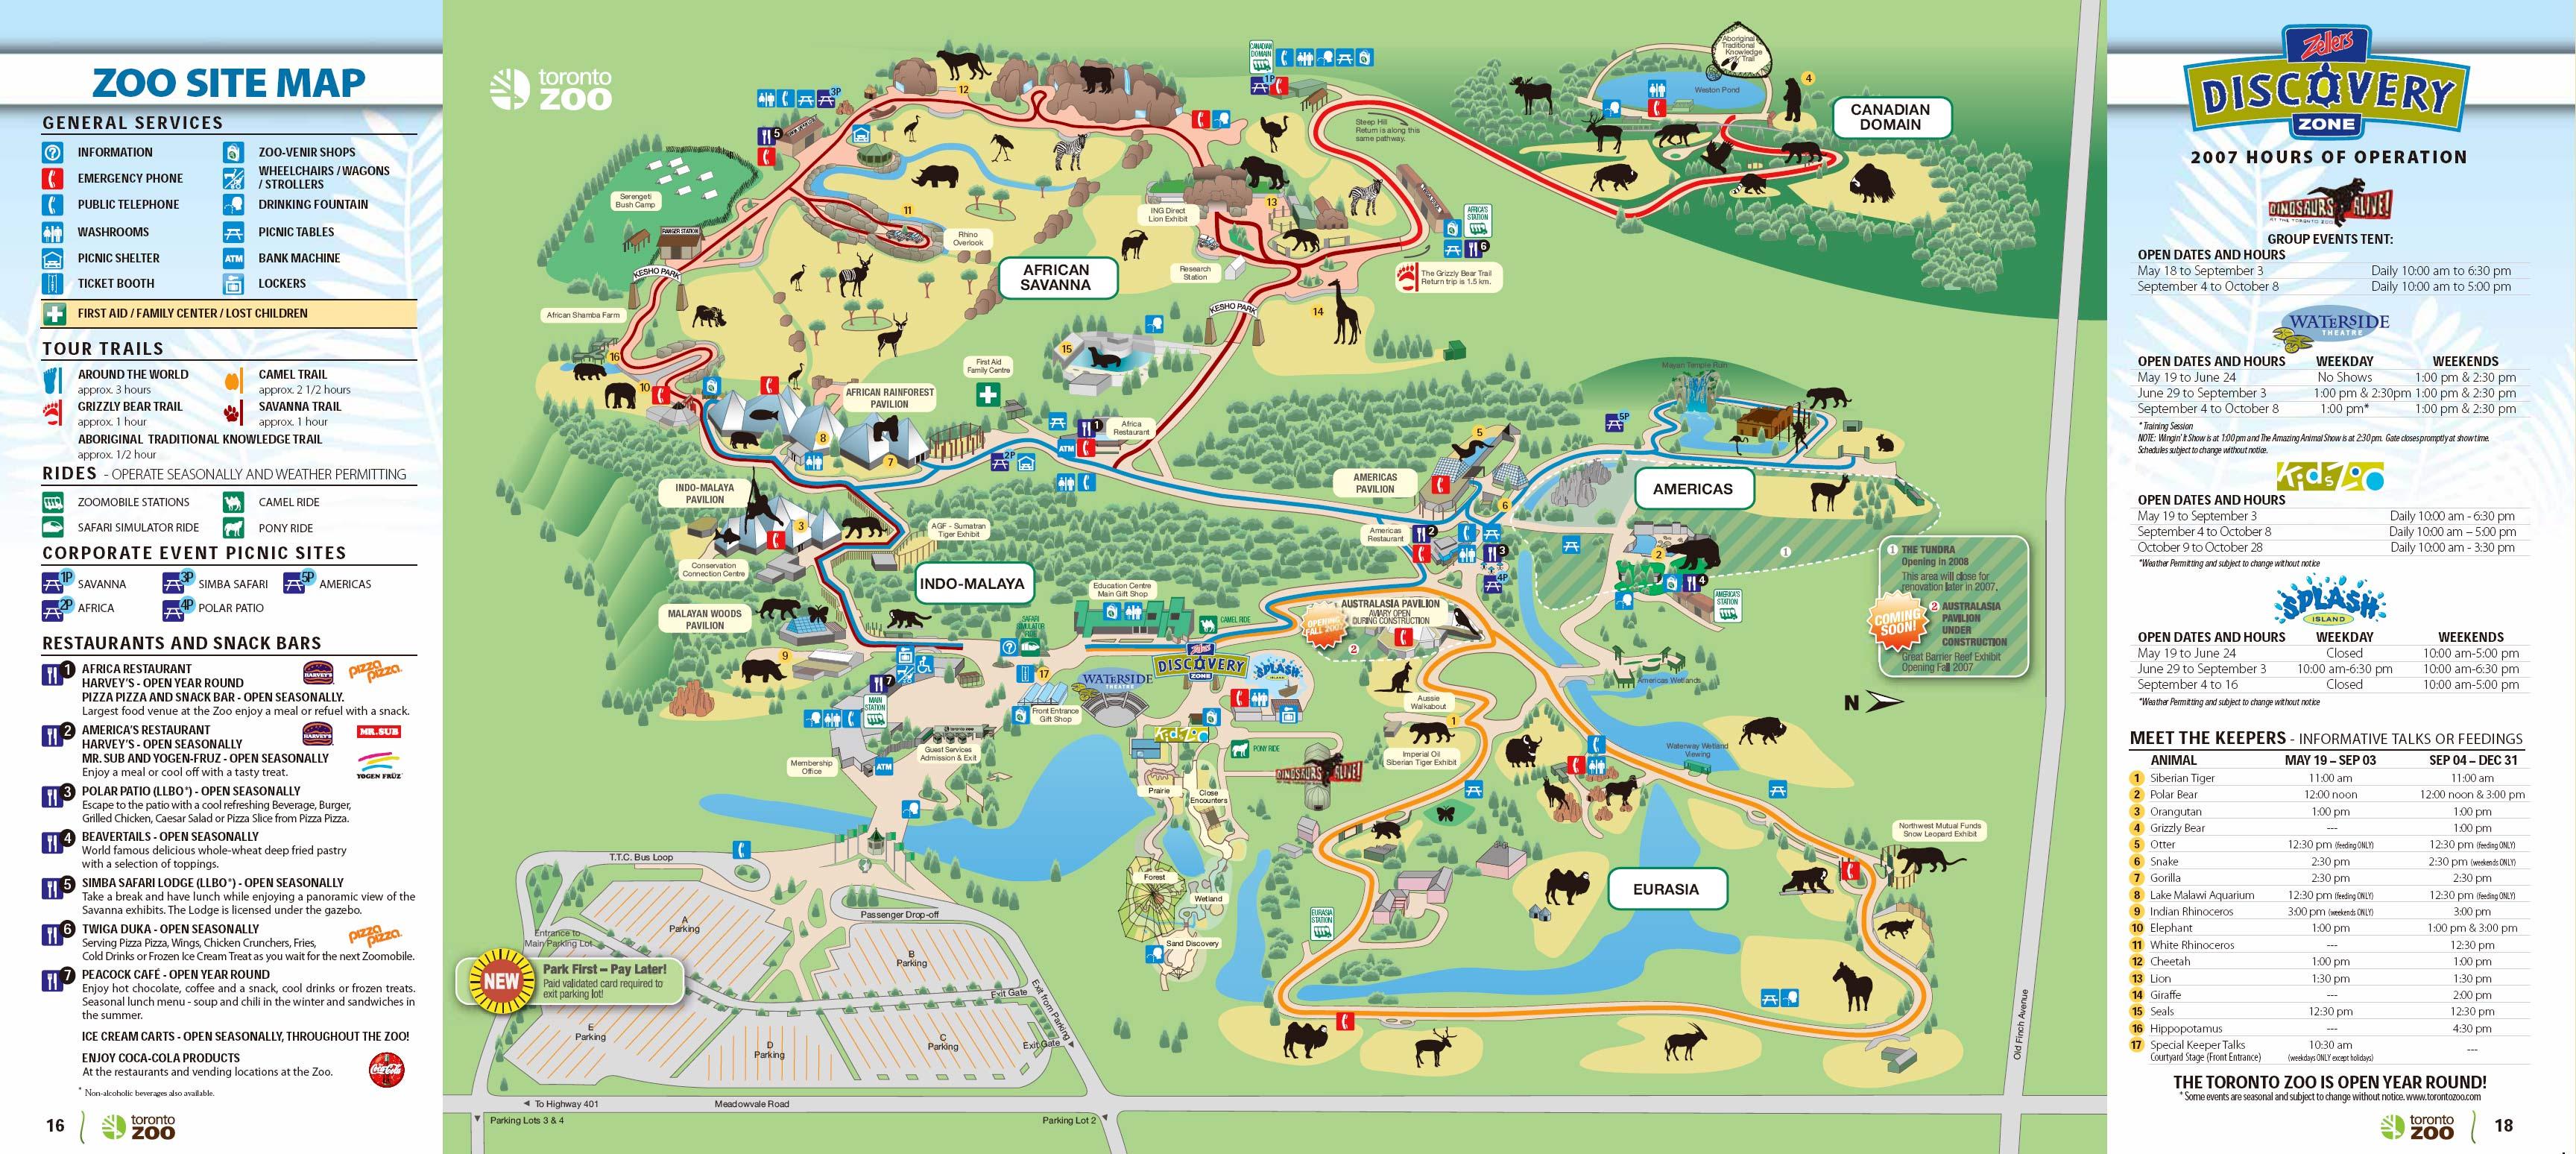 Franklin Park Zoo Map